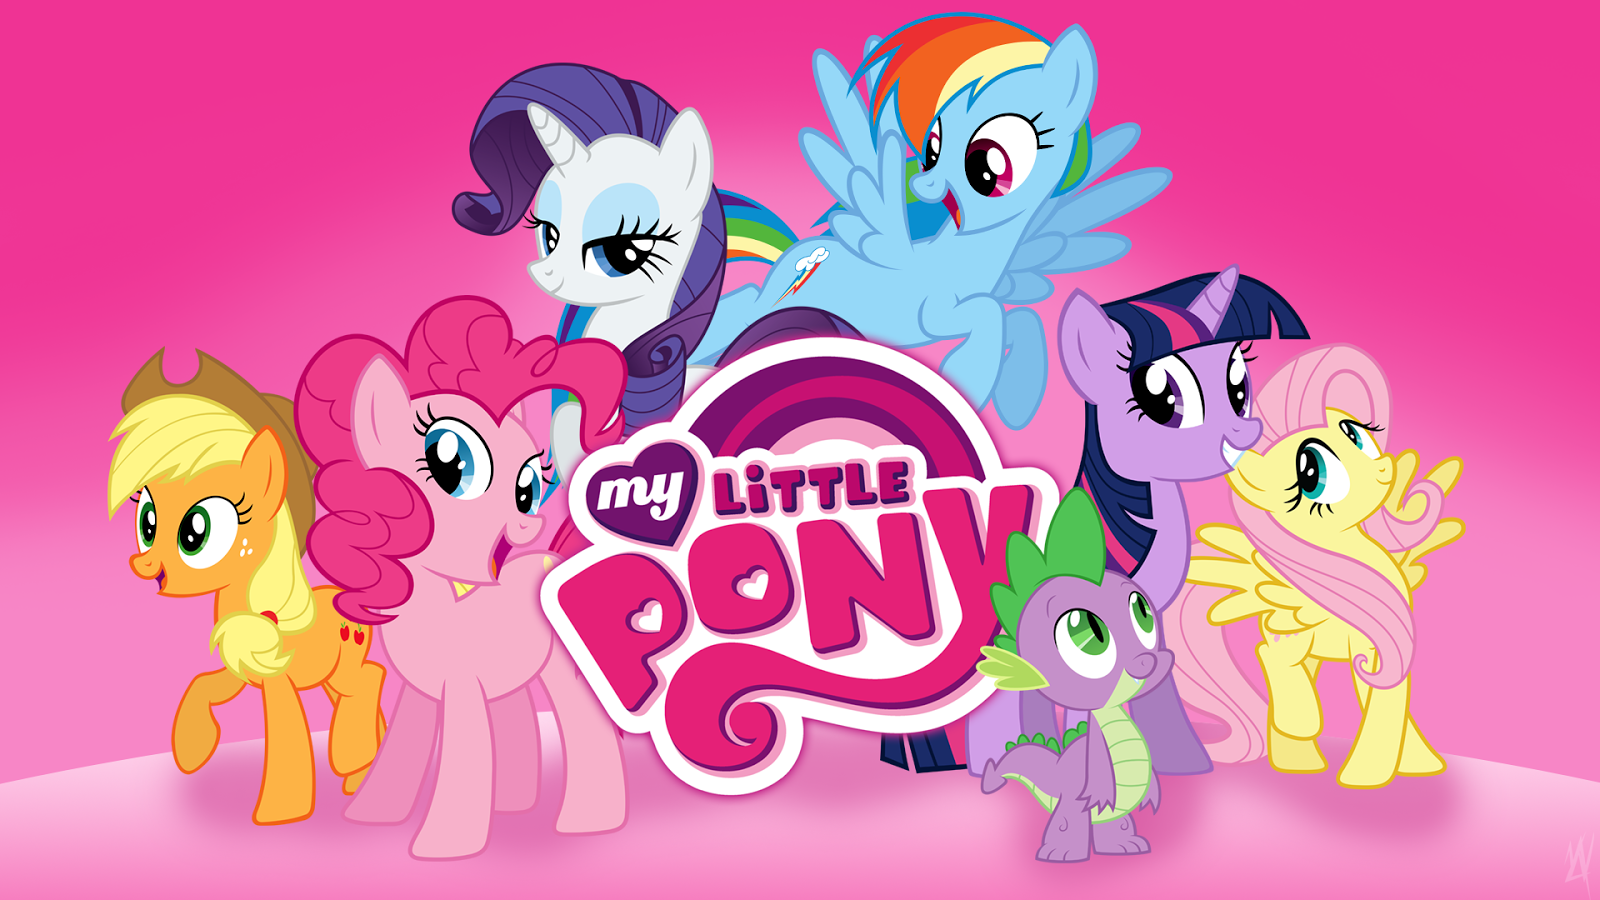 my little pony logo ponyville review blogger